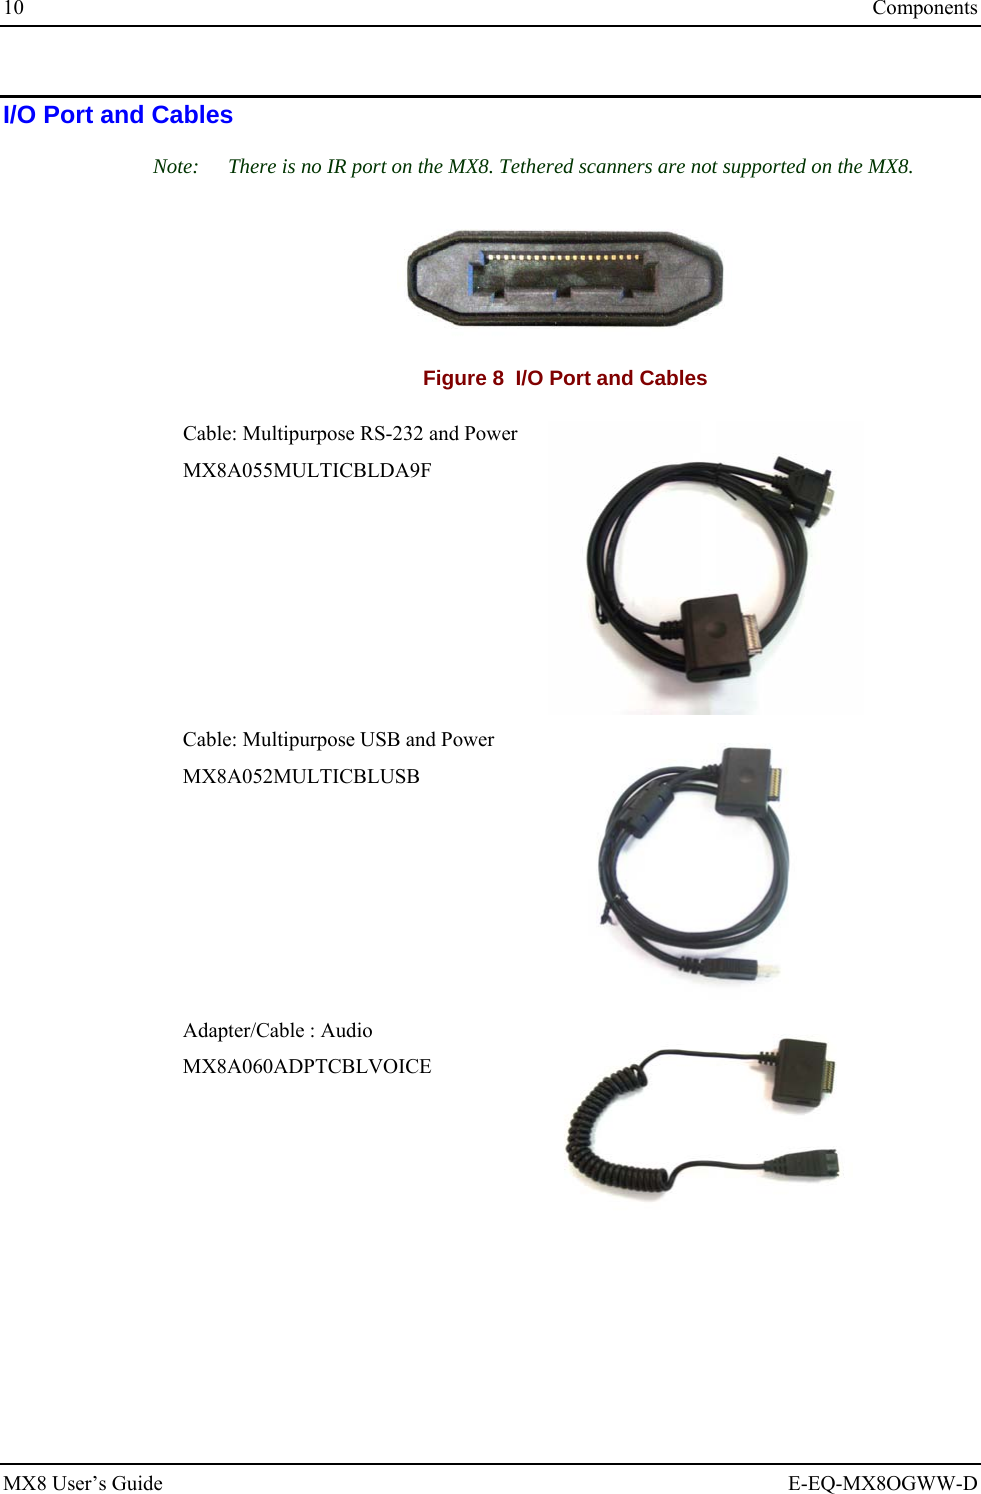 10  Components MX8 User’s Guide  E-EQ-MX8OGWW-D I/O Port and Cables Note:  There is no IR port on the MX8. Tethered scanners are not supported on the MX8.  Figure 8  I/O Port and Cables Cable: Multipurpose RS-232 and Power MX8A055MULTICBLDA9F  Cable: Multipurpose USB and Power MX8A052MULTICBLUSB  Adapter/Cable : Audio MX8A060ADPTCBLVOICE   